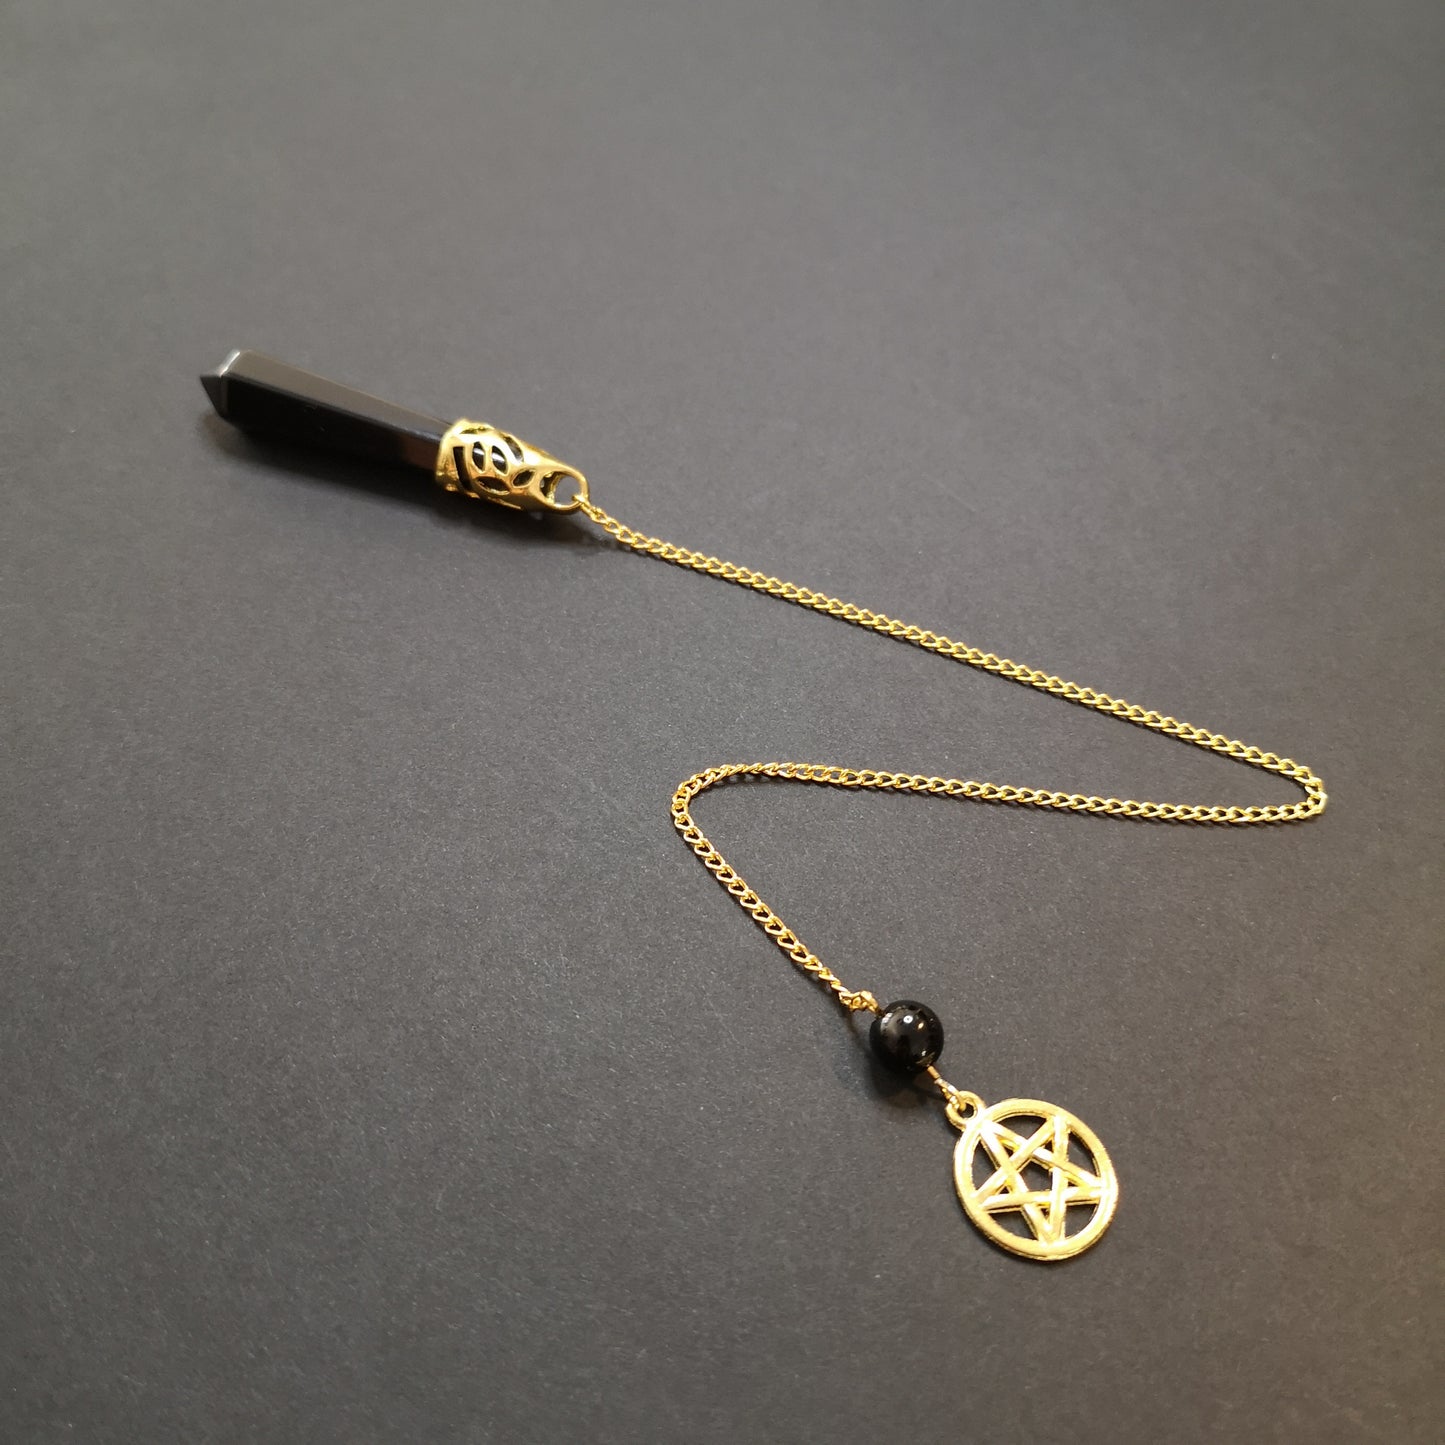 Golden onyx and pentacle dowsing pendulum - The French Witch shop